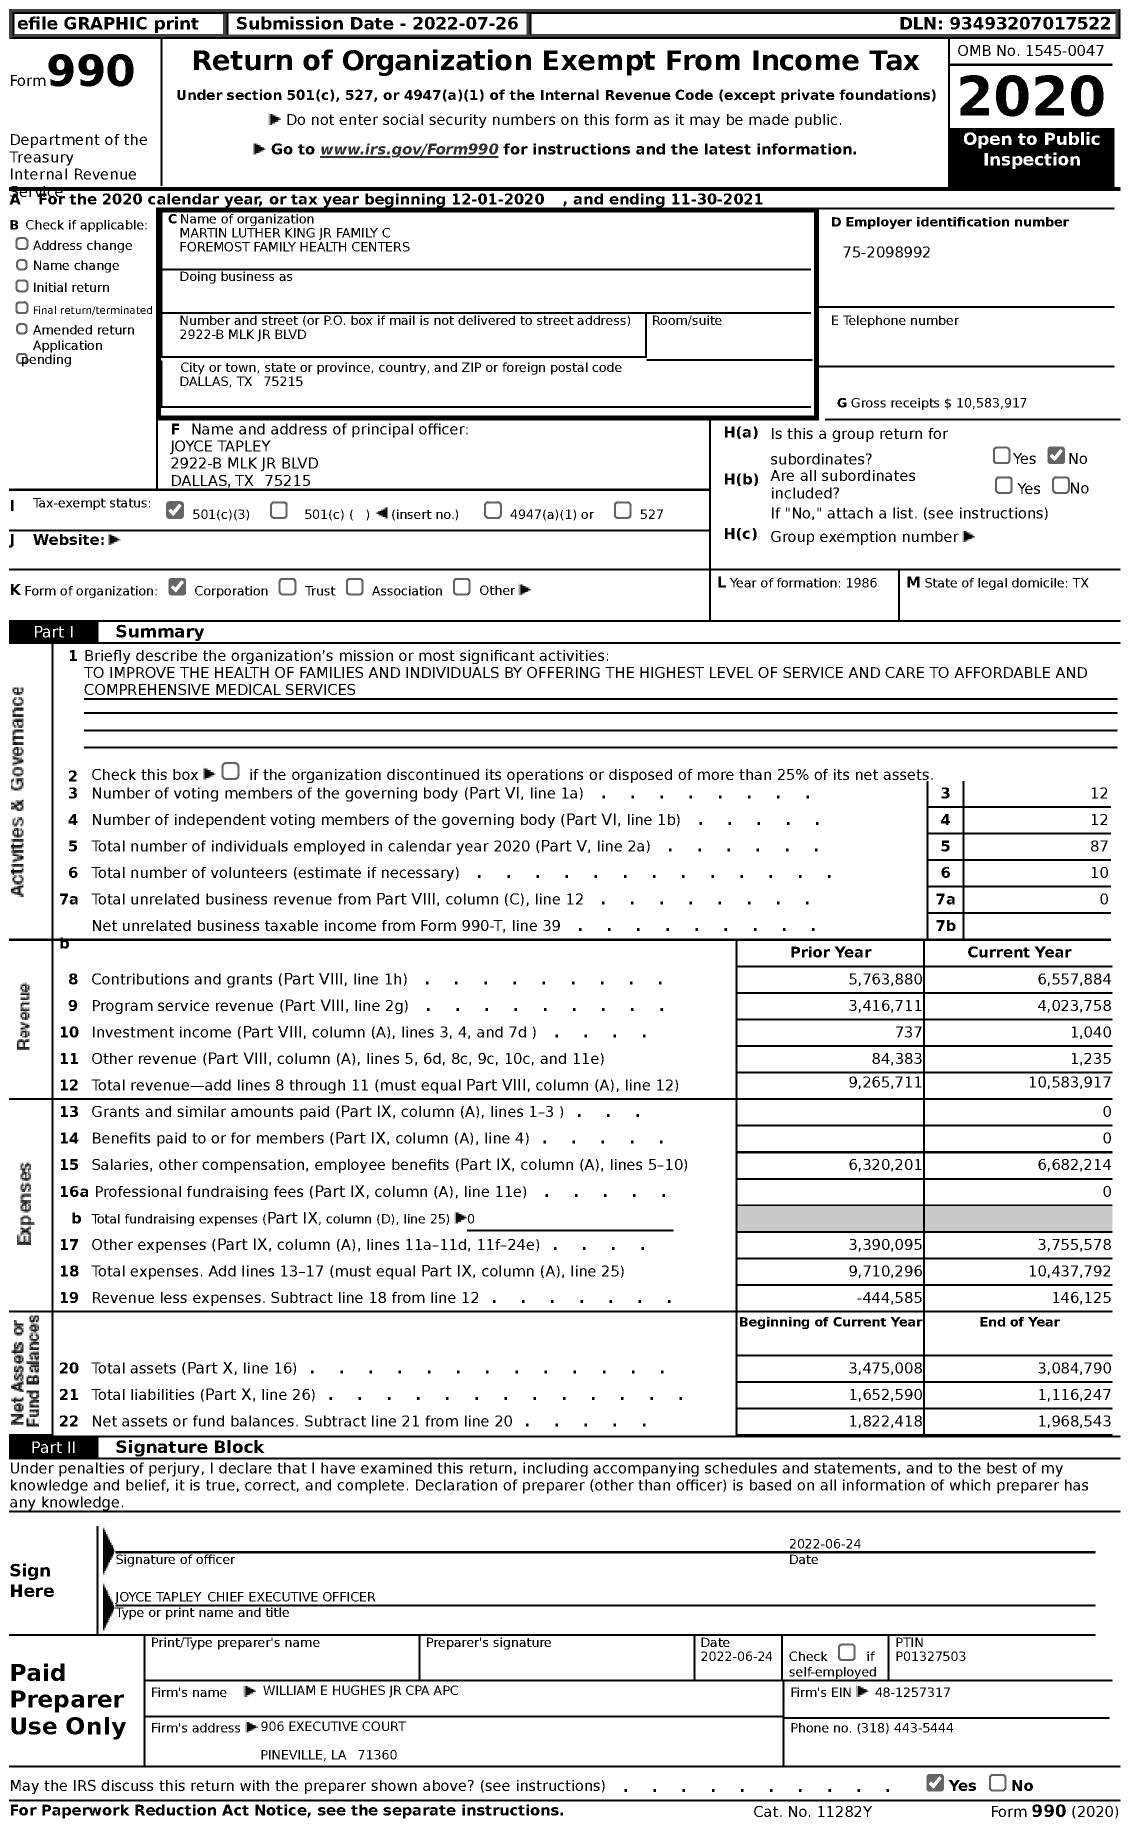 Image of first page of 2020 Form 990 for Martin Luther King JR Family C Foremost Family Health Centers